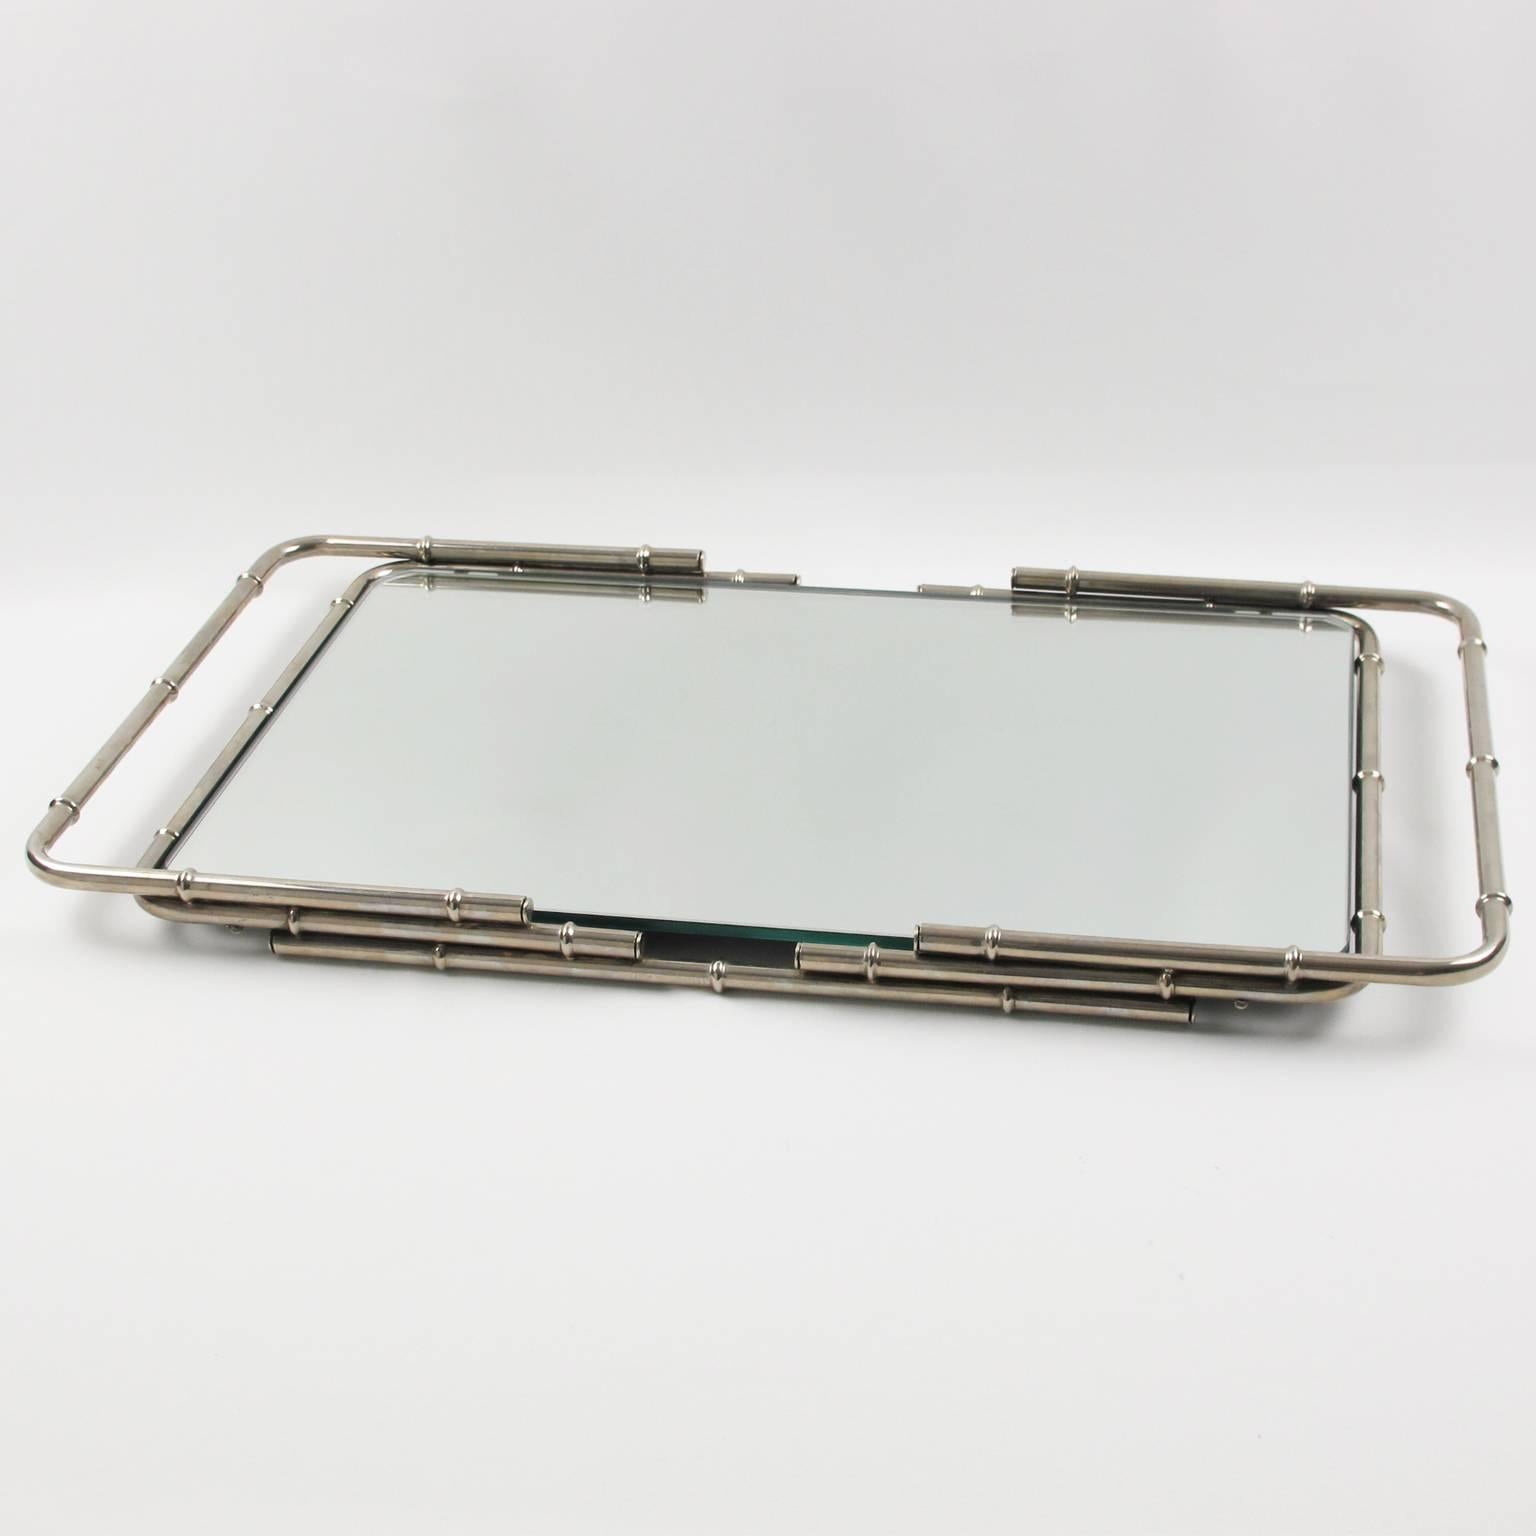 Elegant serving tray for a bar, cocktail party, vanity, or simply on its own. Chrome-plated metal frame with mirrored glass insert and bamboo carved pattern handles and gallery.
Measurements: 21.25 in. wide (54 cm) x 12 in. deep (30.5 cm) x 1.38